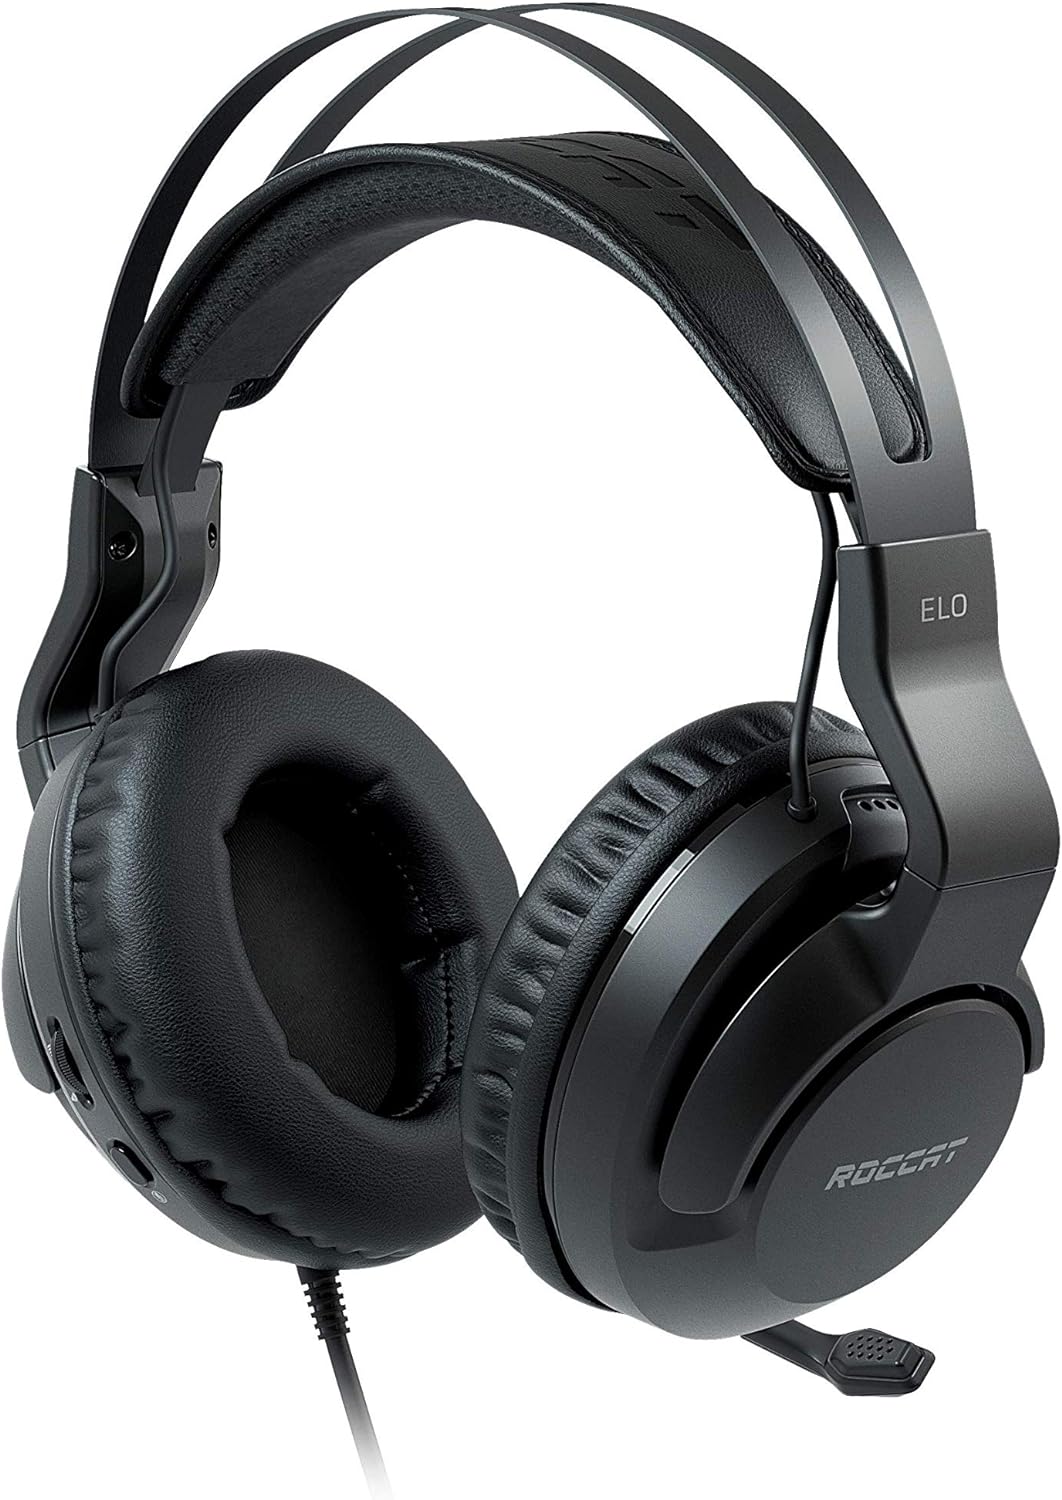 Roccat ELO X Stereo Gaming Headset